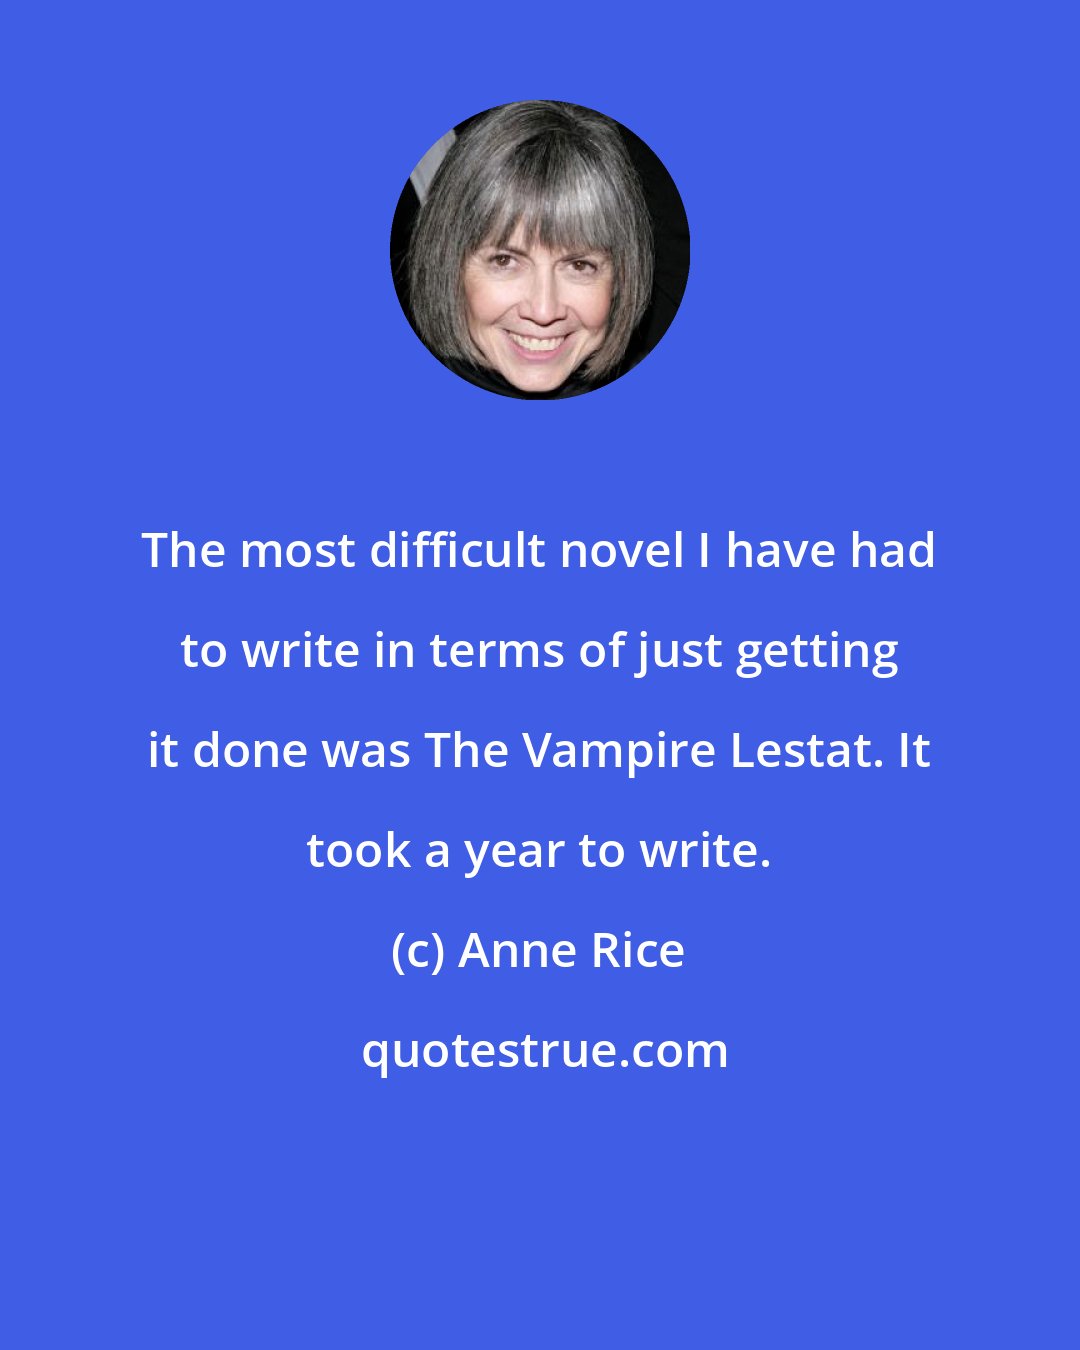 Anne Rice: The most difficult novel I have had to write in terms of just getting it done was The Vampire Lestat. It took a year to write.